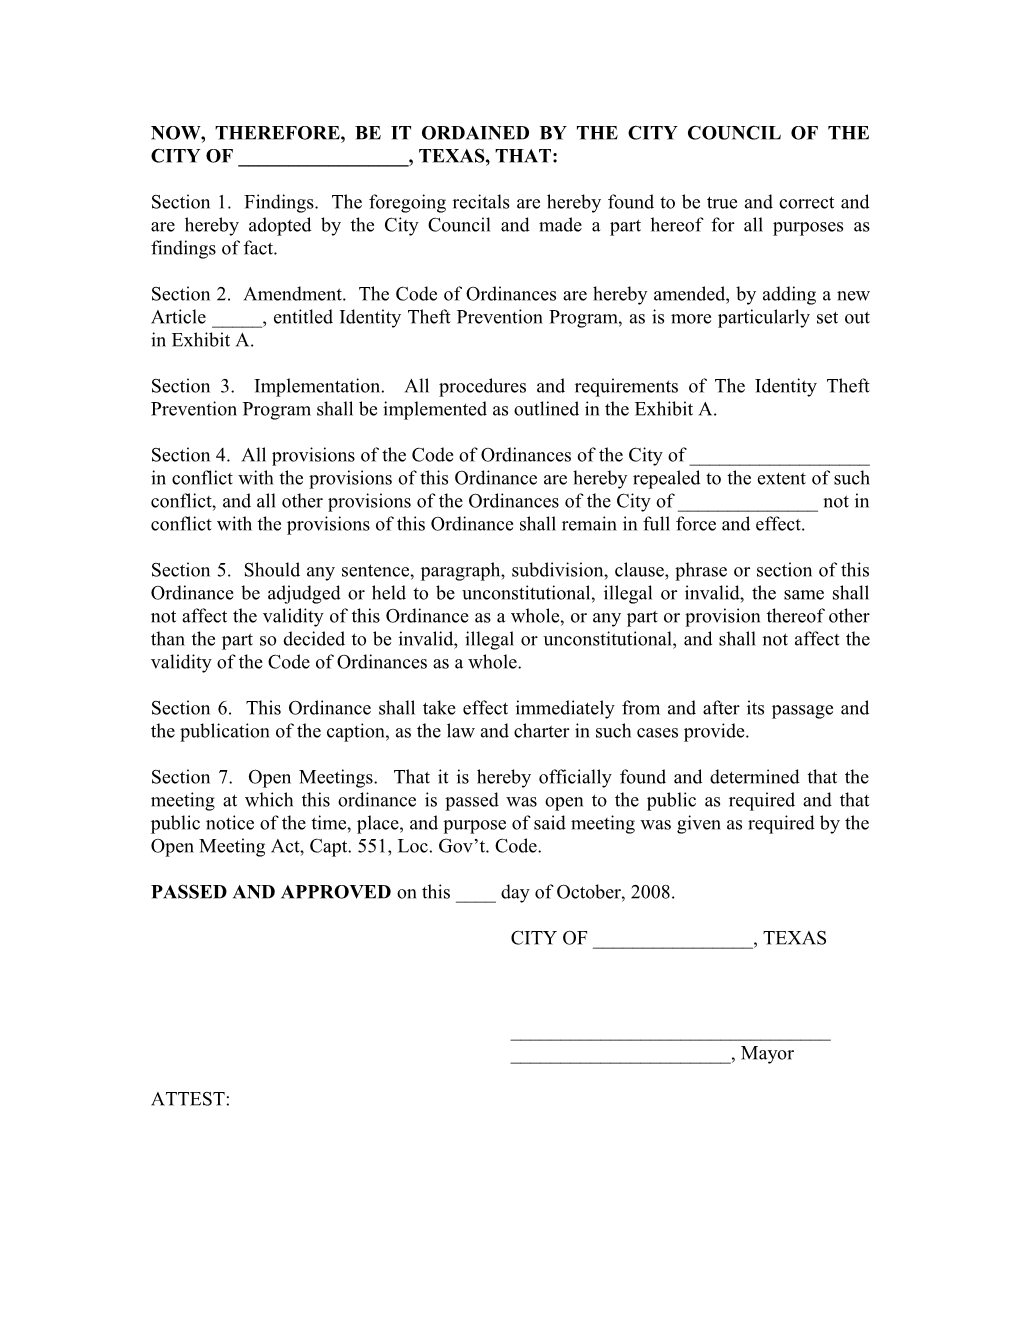 An Ordinance by the City of ______, Texas, Providing a New Article, Article ______Establishing